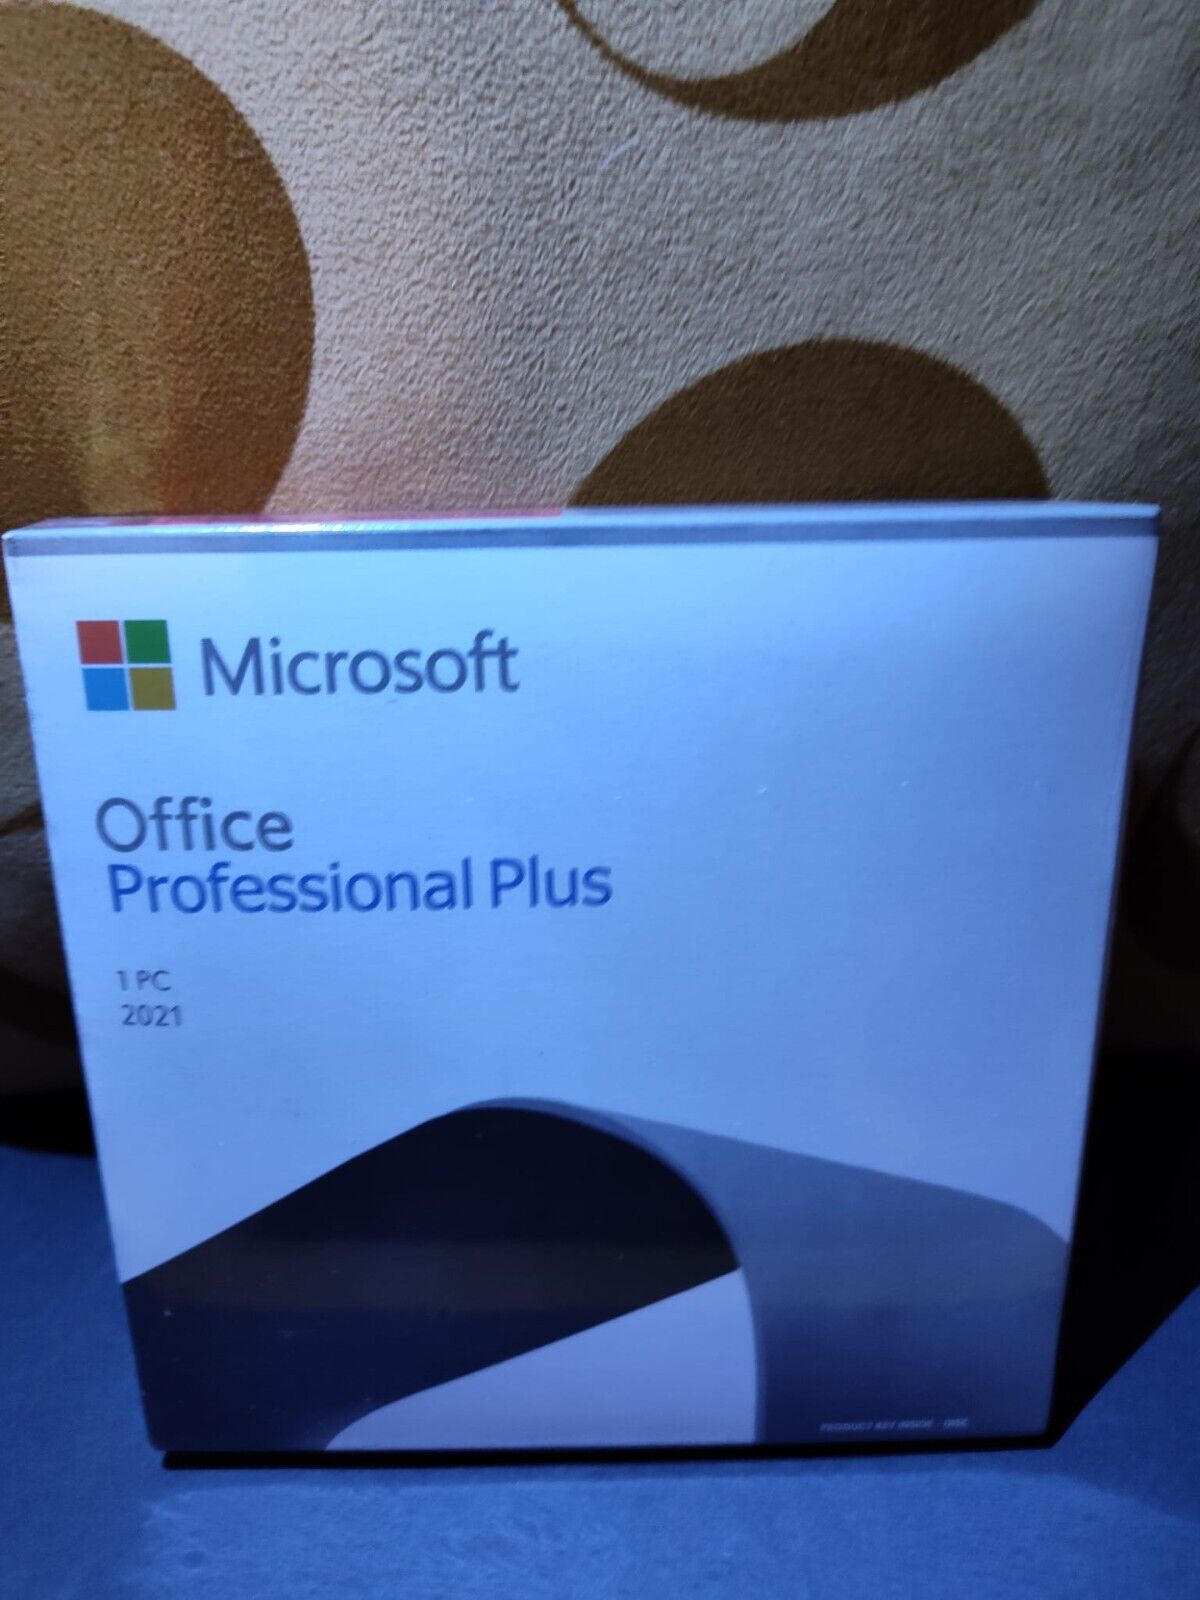 Microsoft Office 2021 Professional Plus - DVD - New Sealed Retail Package✅